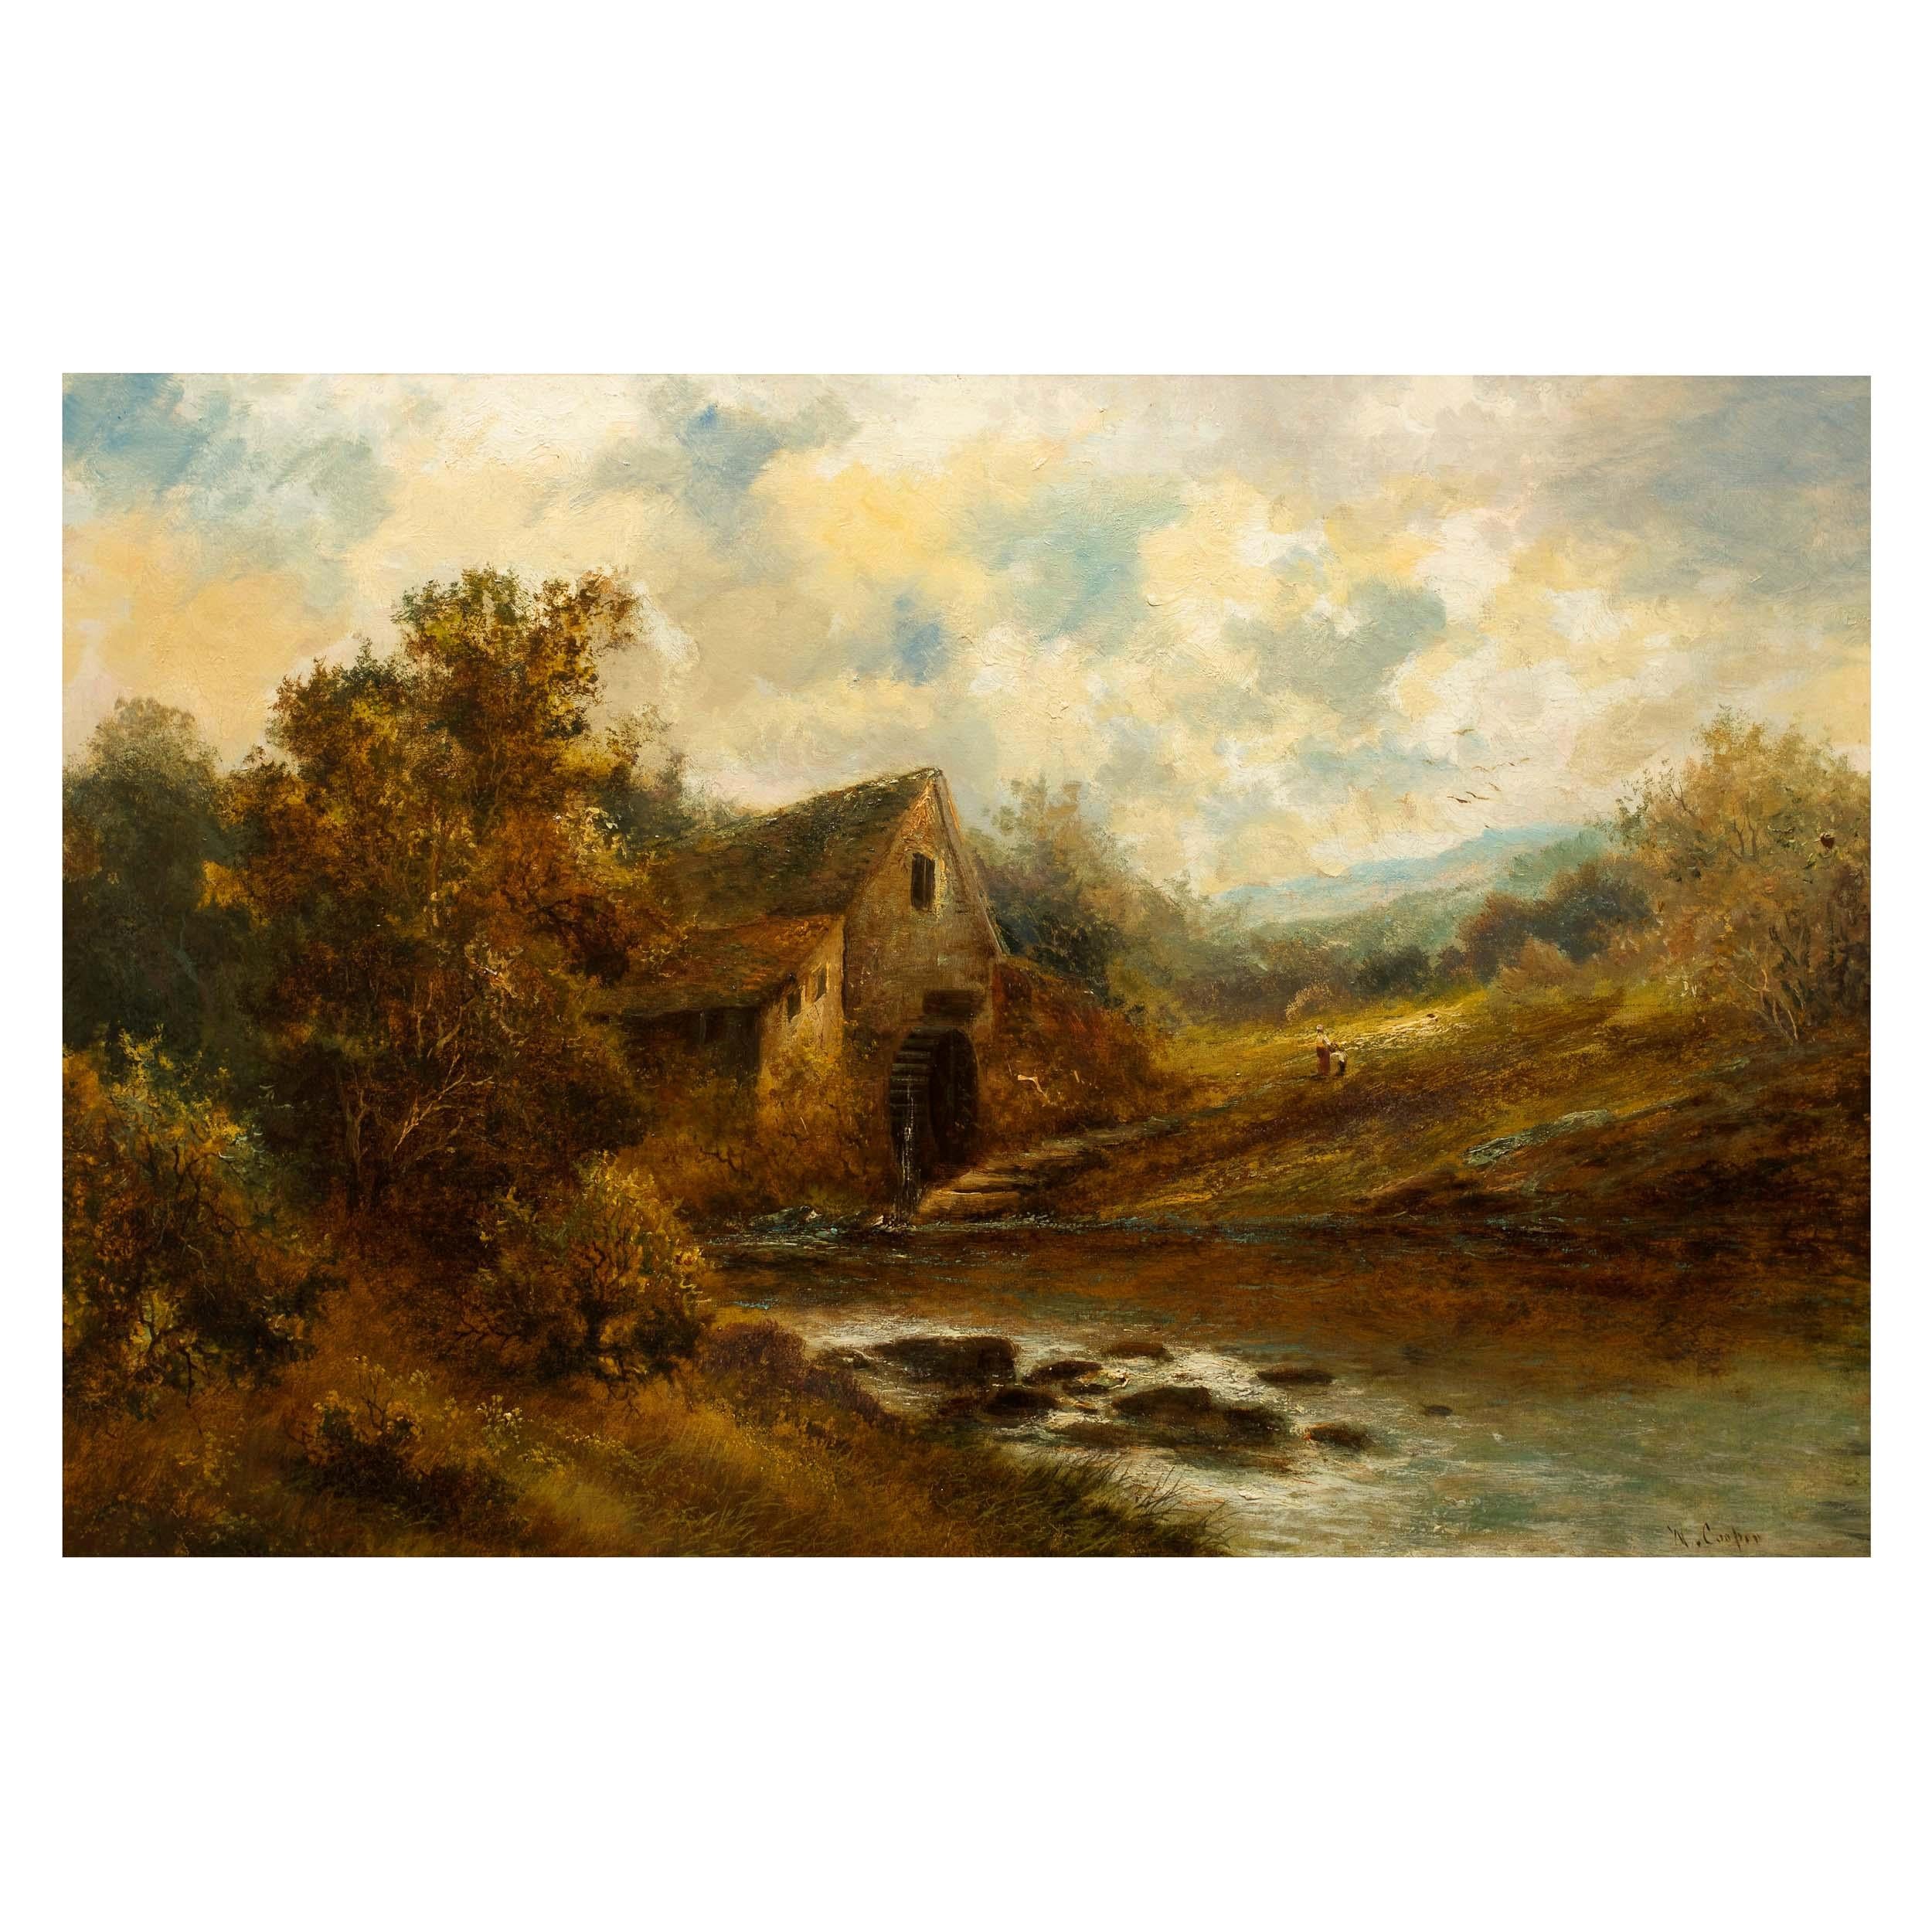 British School '19th Century' Landscape Painting of "The Old Mill"